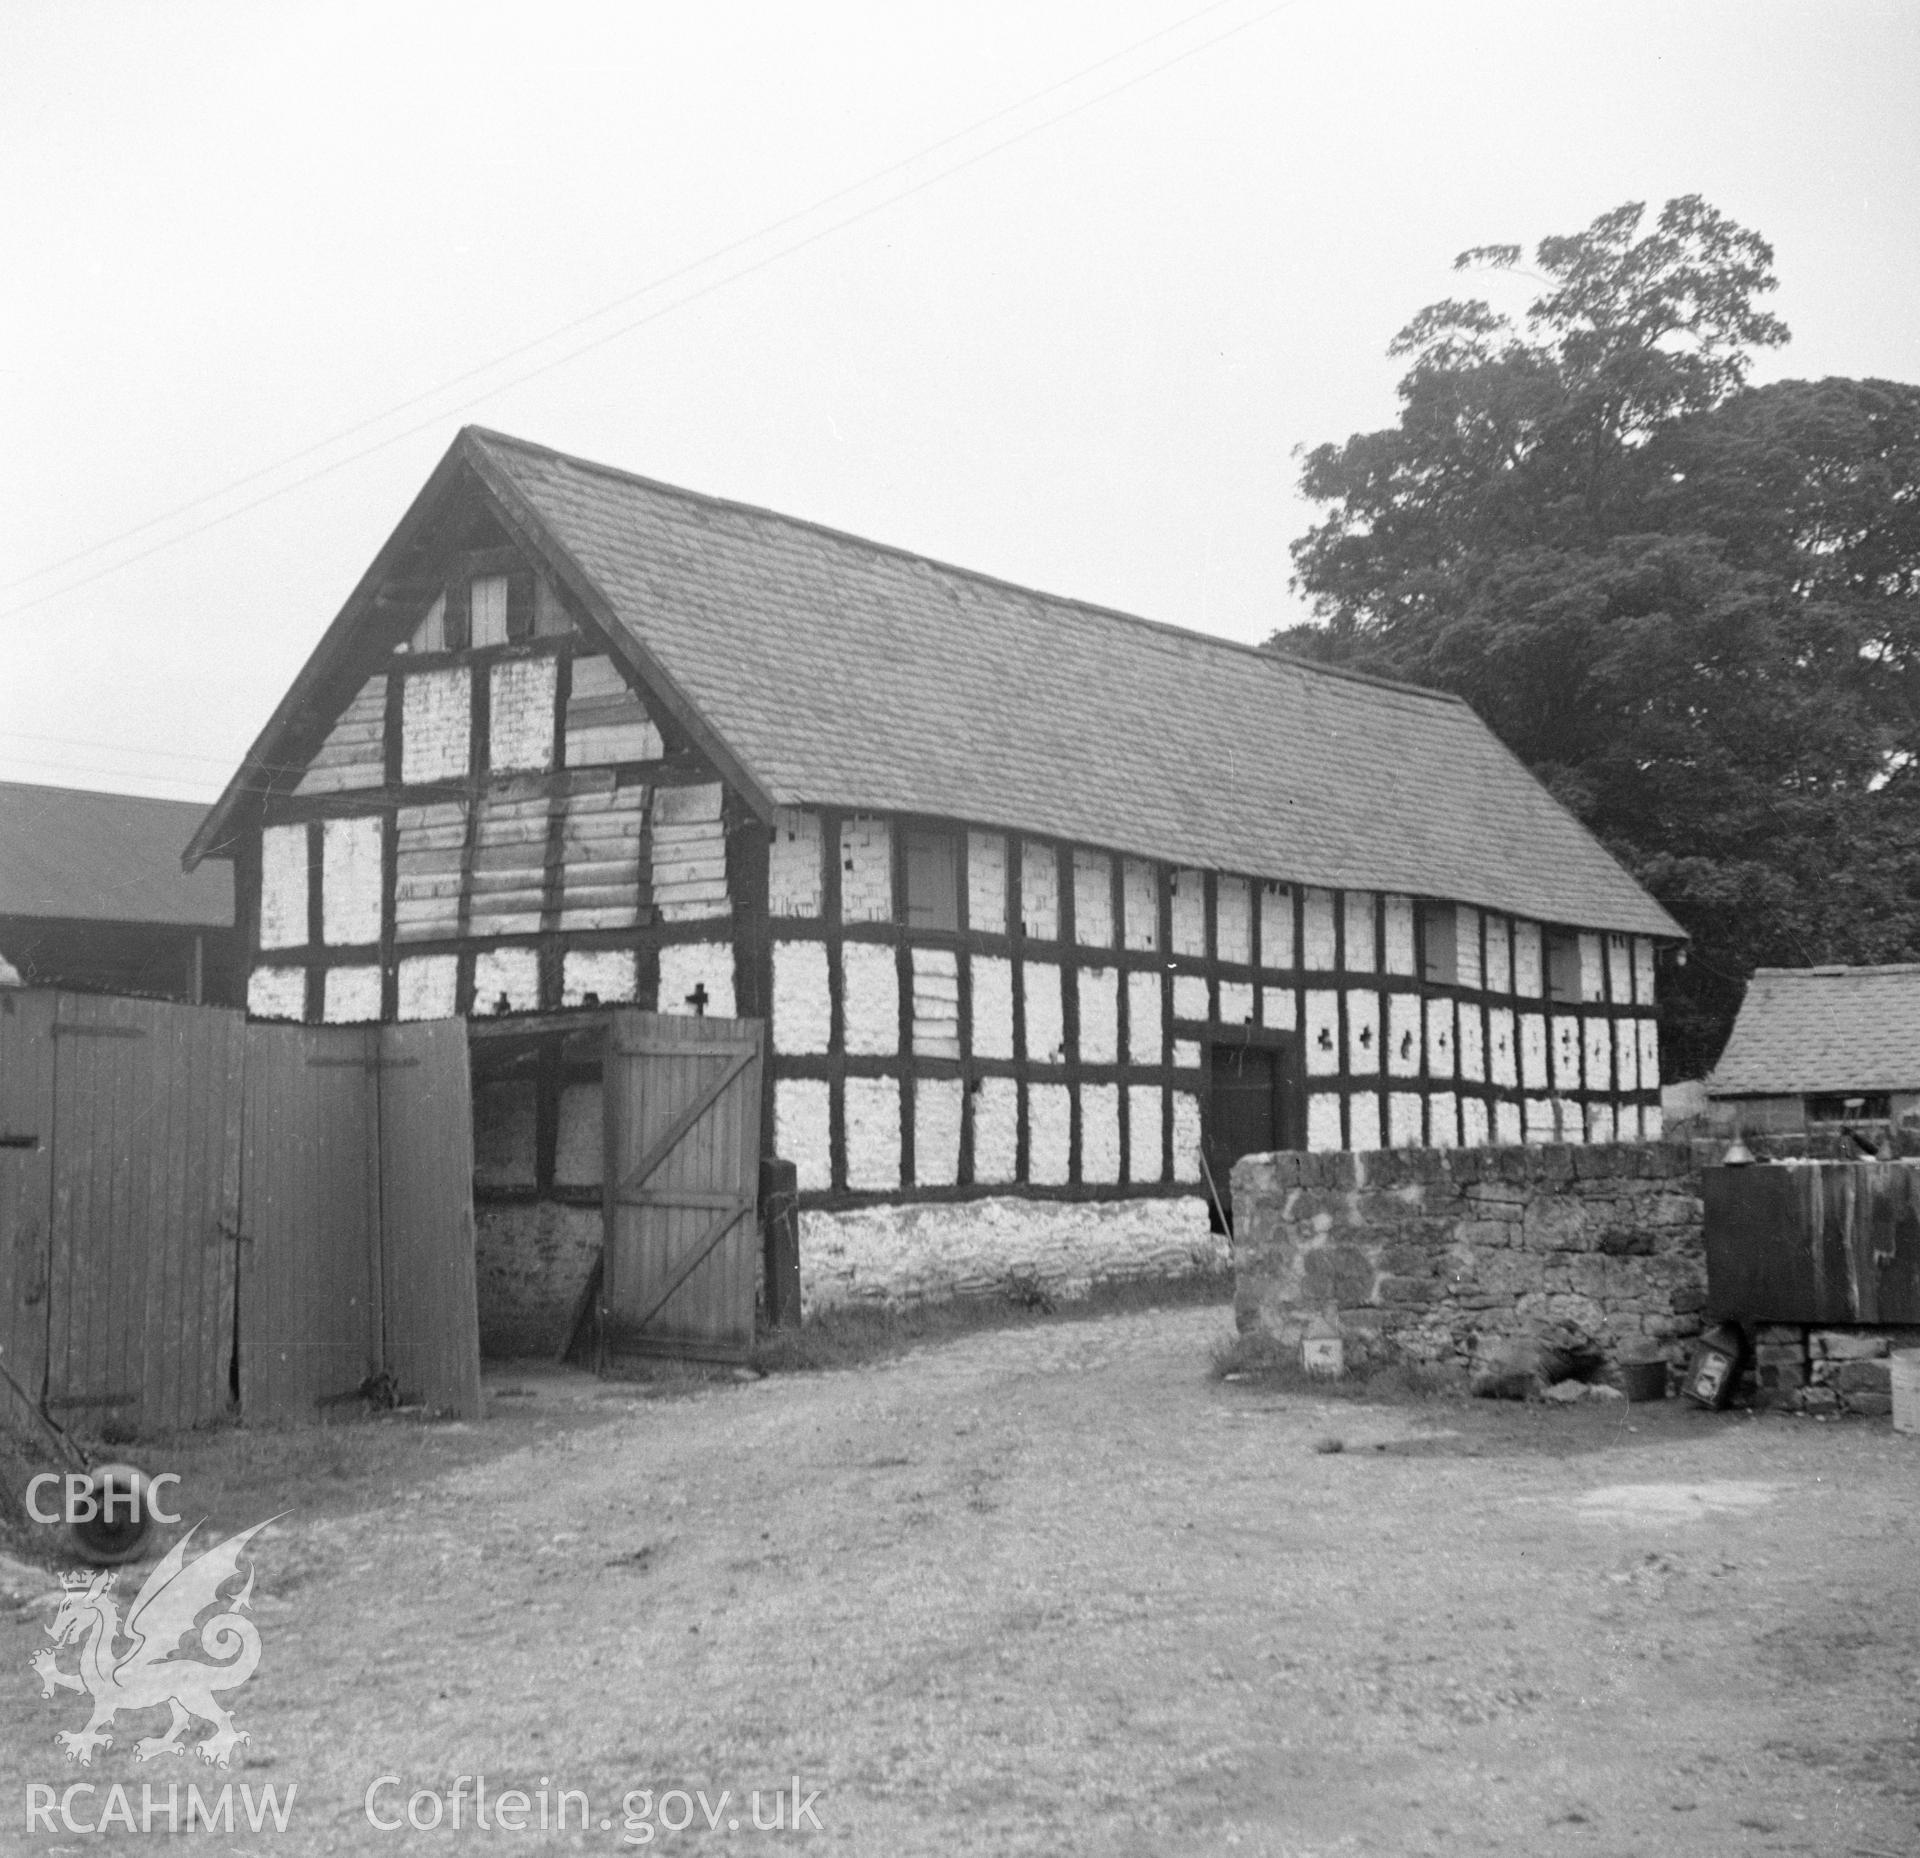 Digital copy of a nitrate negative showing exterior view of barn at Cefn Coch, Ruthin, Denbighshire.